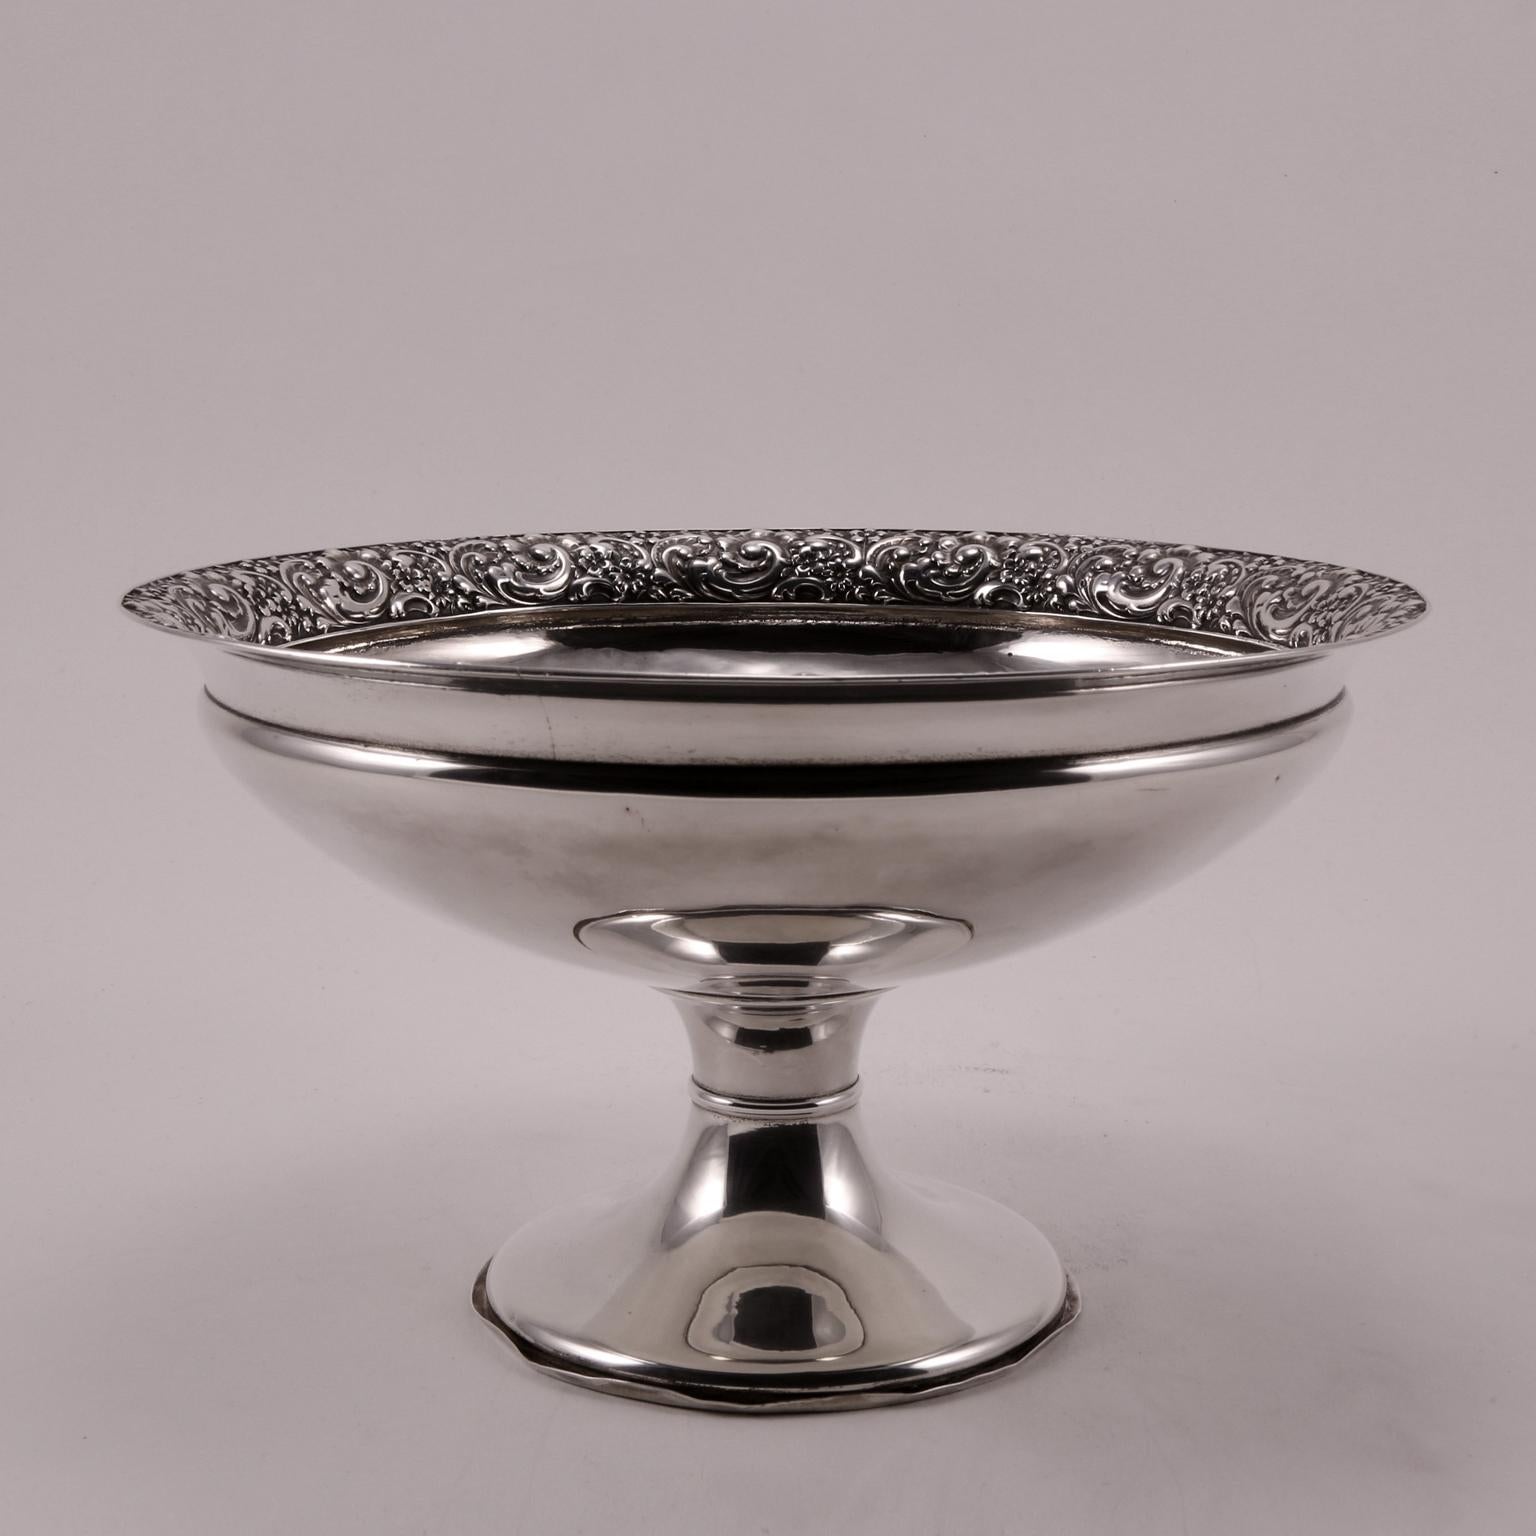 A rich decorative band, floral-themed, thickly covers all the edge of this riser.
The base is decorated with a slight ripple, creating a balanced harmony between the various parts.
Produced by Tiffany & Co. Inc. New York, 1898.